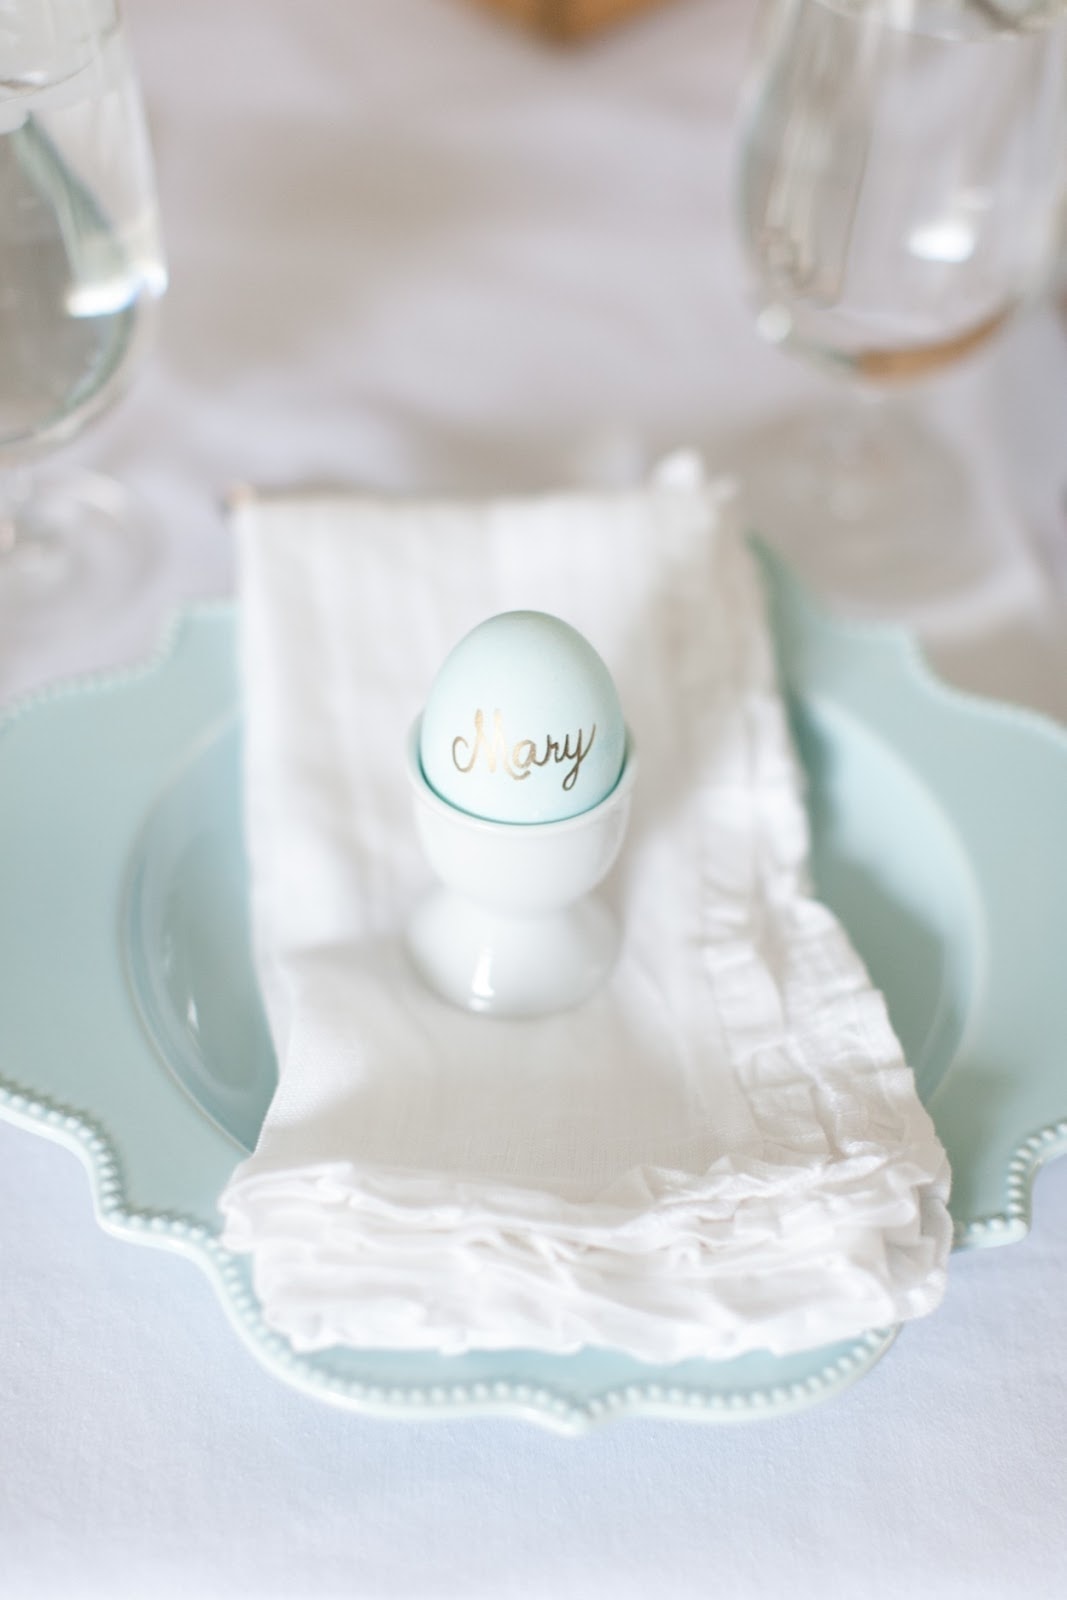 An easter placesetting with an egg in an egg cup, name written on it